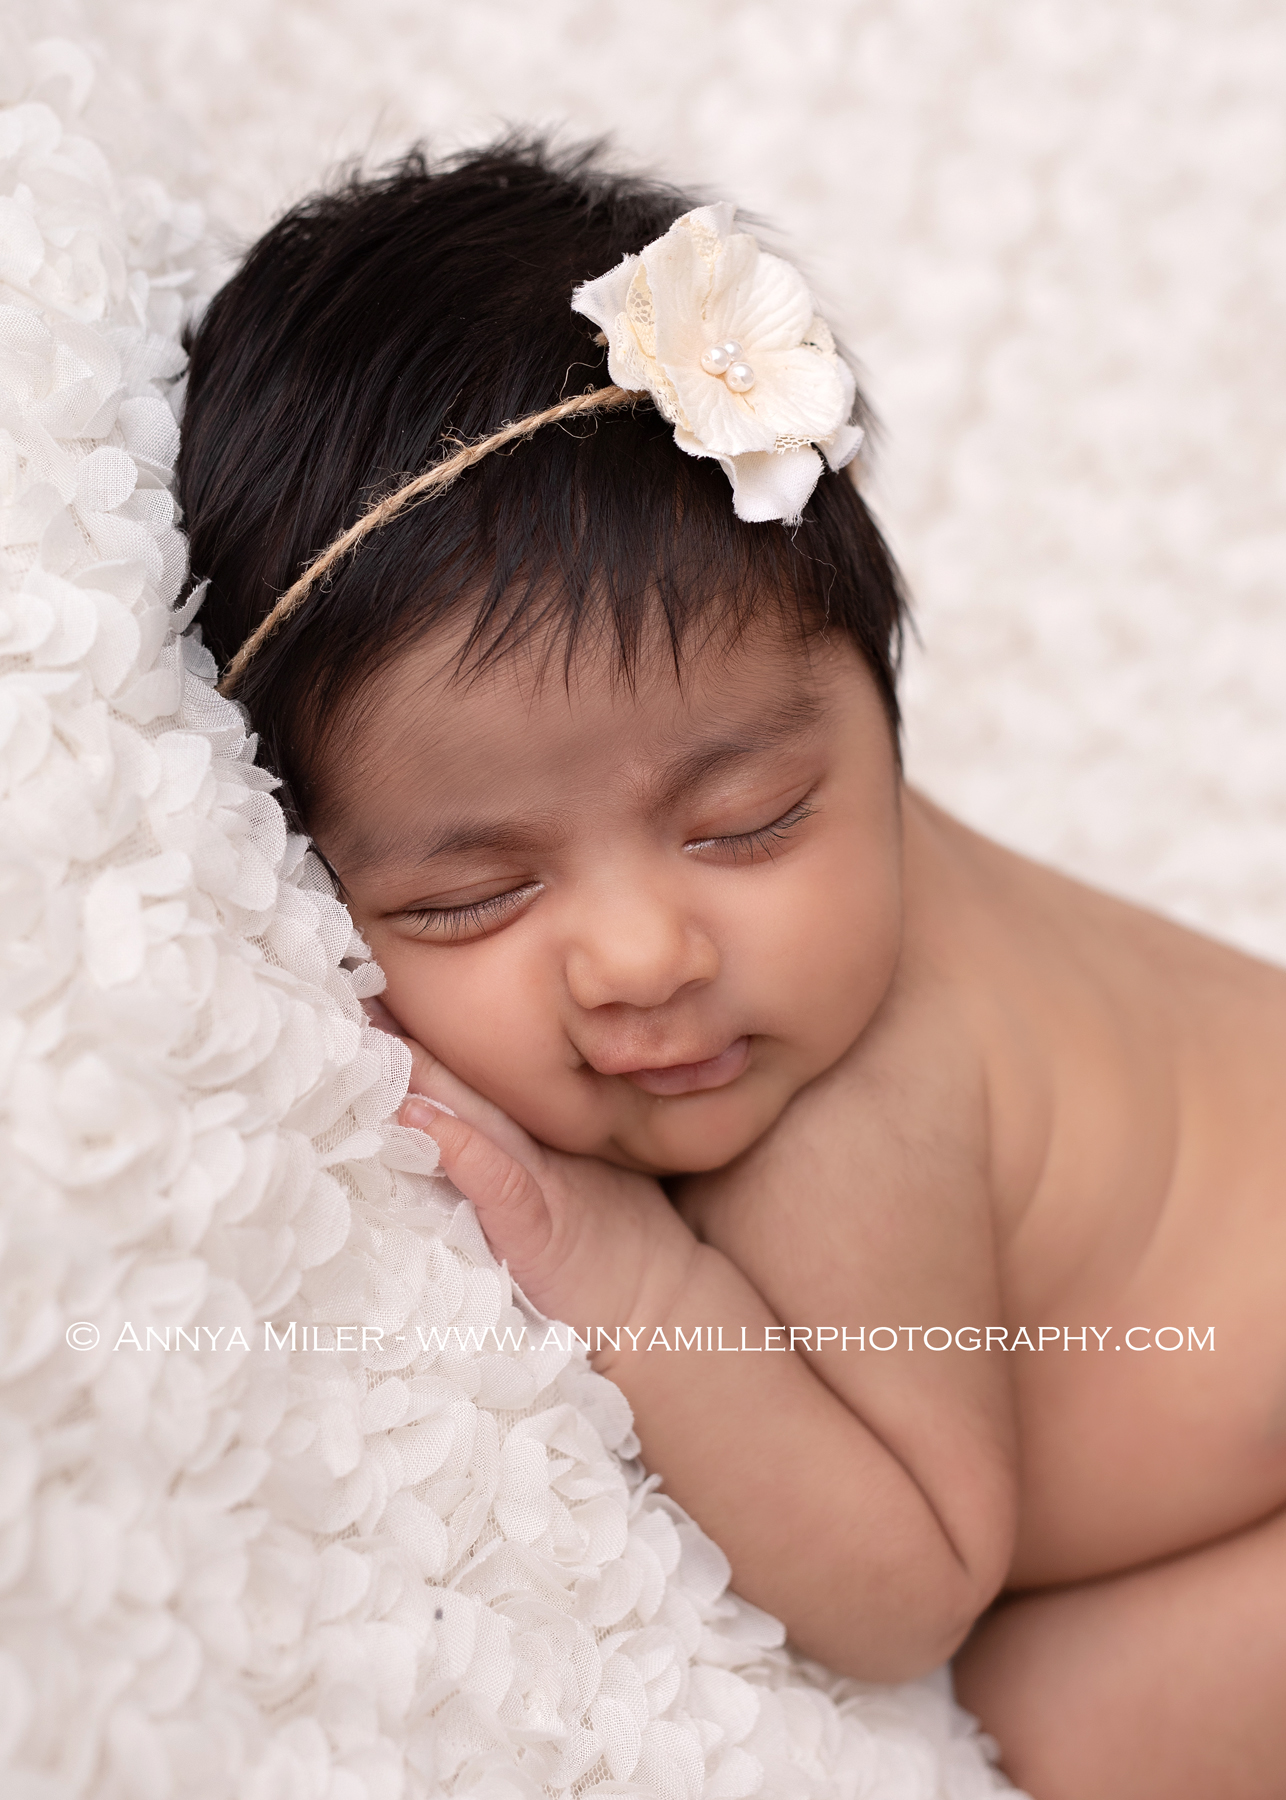 Ajax newborn portraits of brand new baby girl by Annya Miller Photography